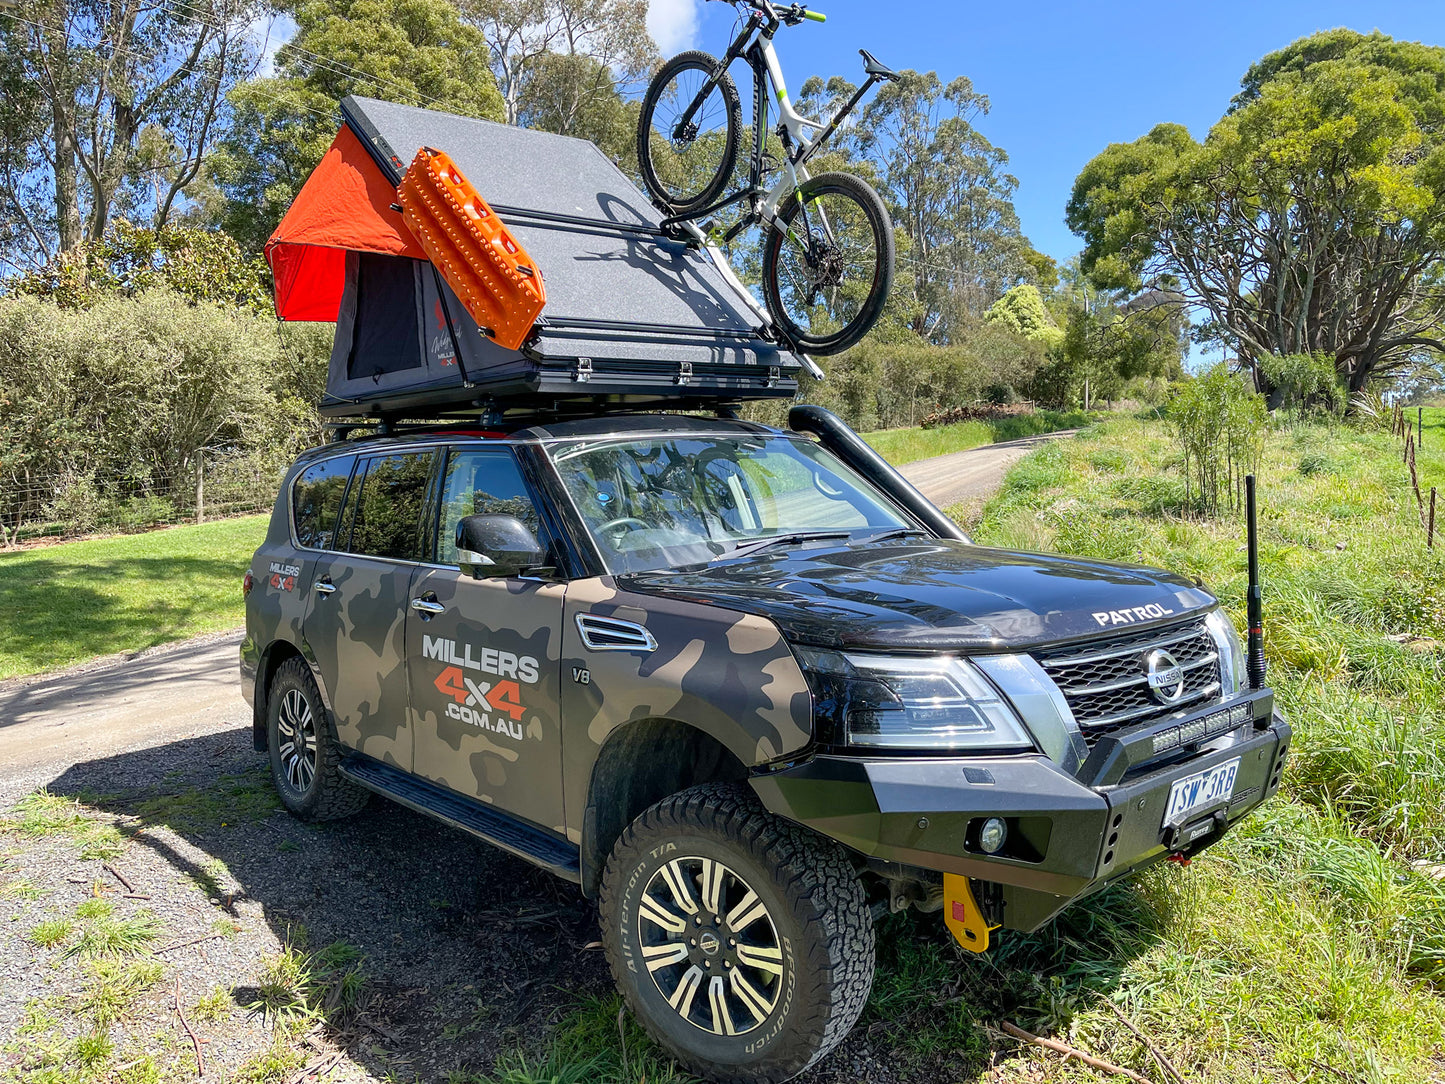 Nissan Patrol Rooftop Tent Millers 4x4 with Bike and Maxtraxx